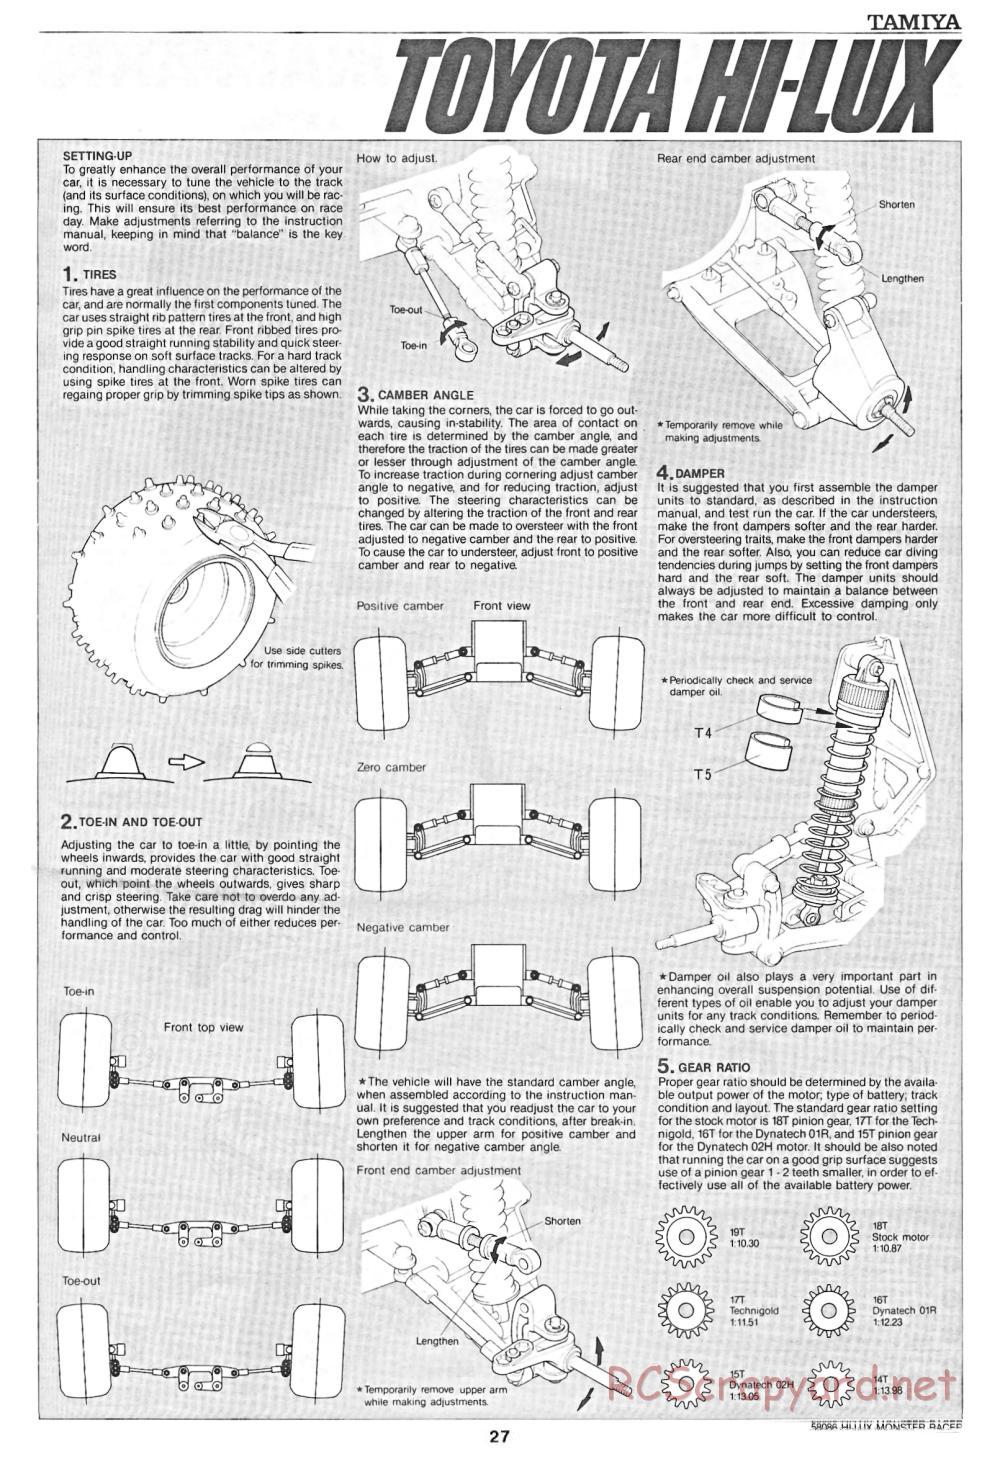 Tamiya - Toyota Hilux Monster Racer - 58086 - Manual - Page 27